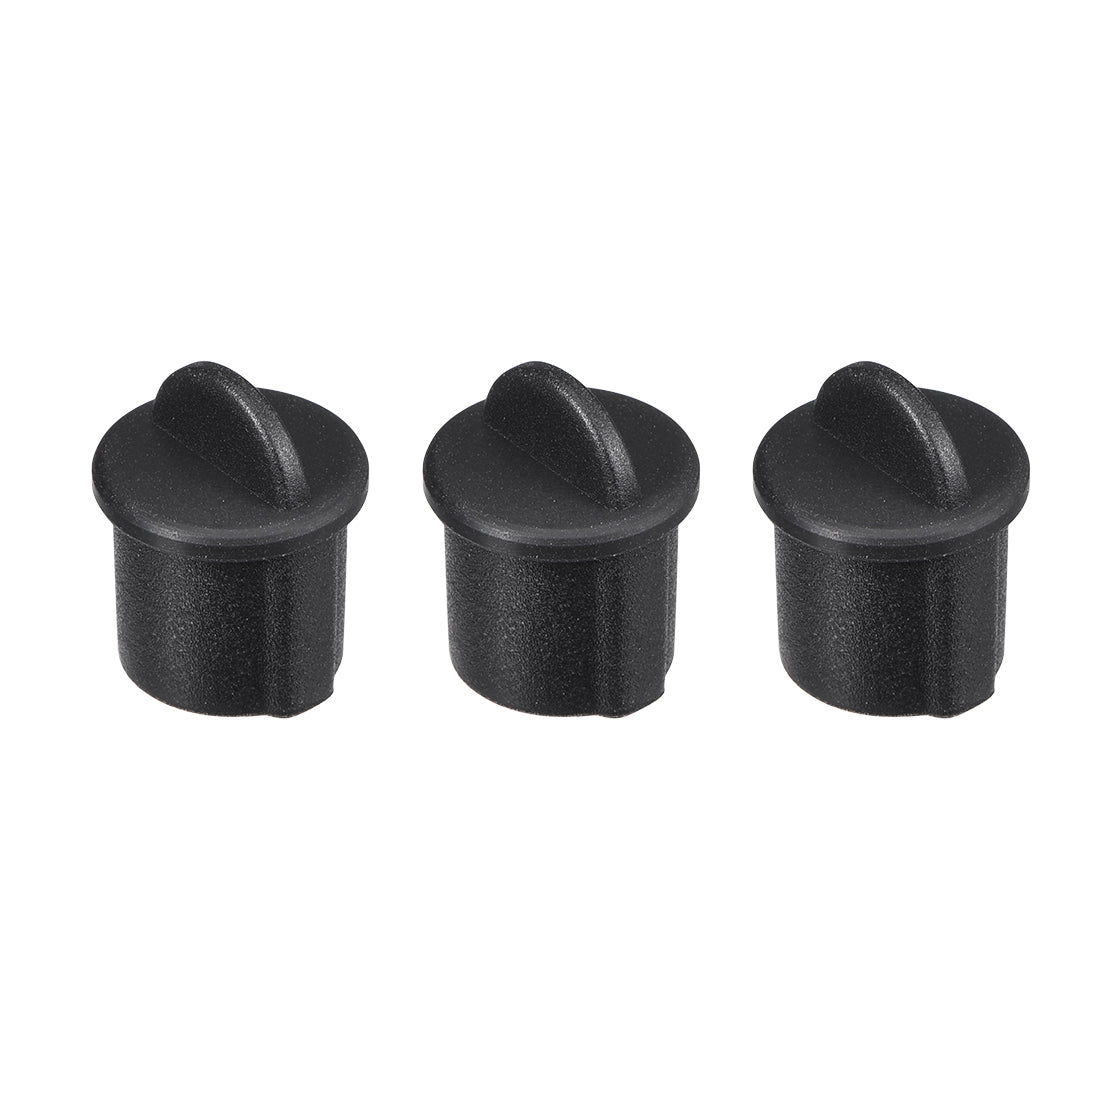 uxcell Uxcell Silicone BNC Anti-Dust Stopper Cap Cover for Female Jack Black 10pcs